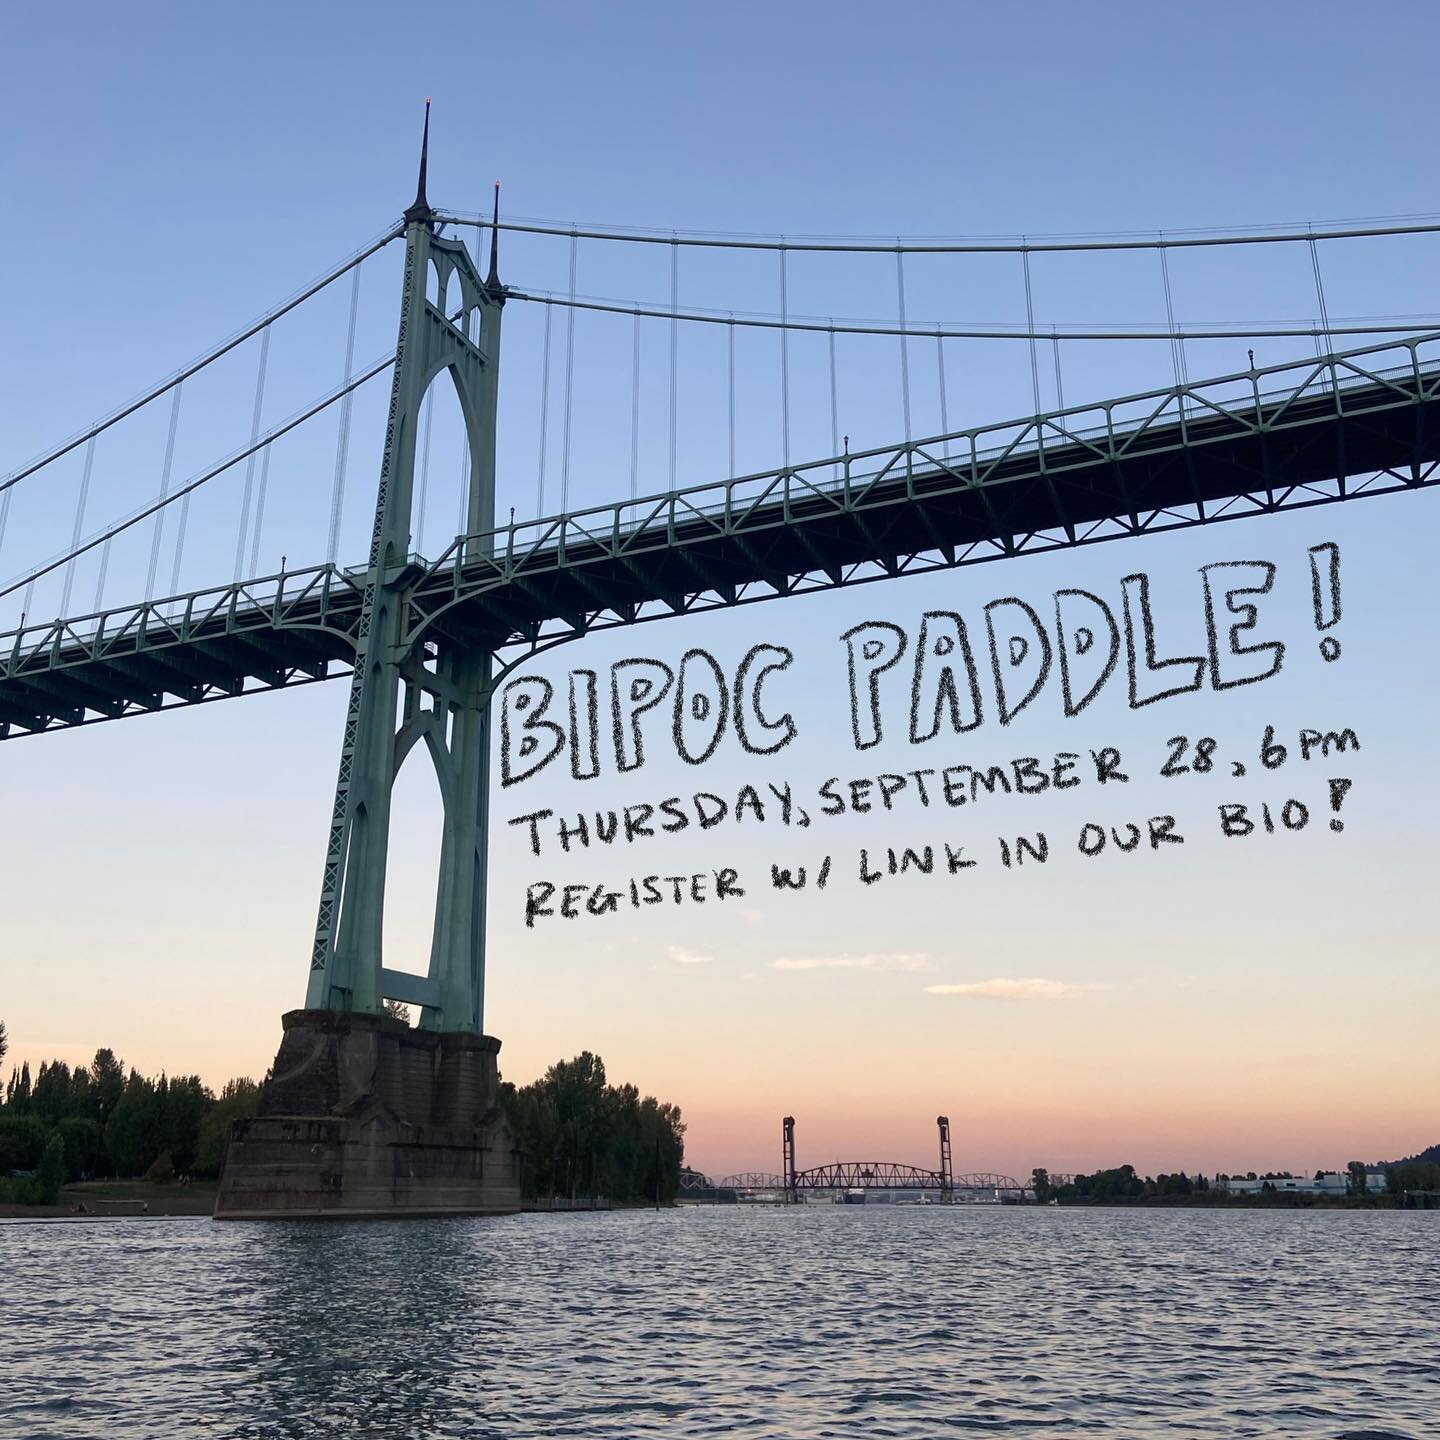 Our BIPOC paddle is happening in 1 week!! Join us on Thursday, September 28th at 6pm for a chill evening paddle! Register with the link in our bio 🌅